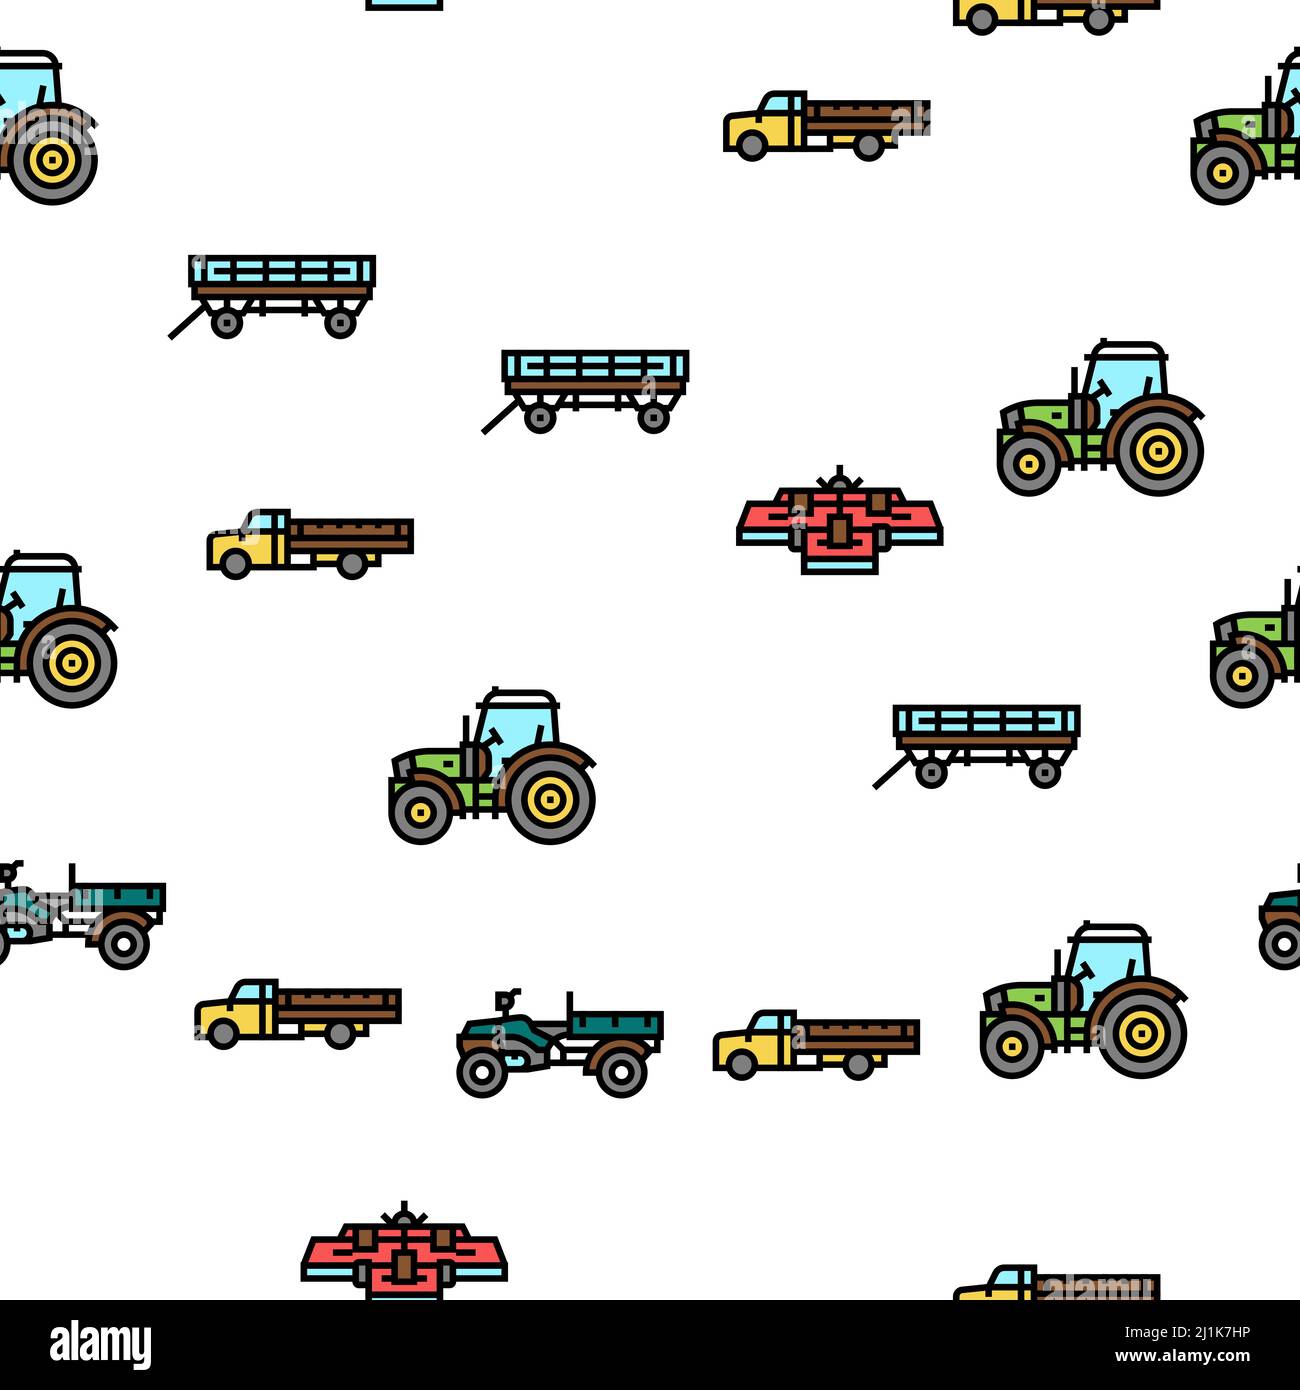 Farm Equipment And Transport Vector Seamless Pattern Stock Vector